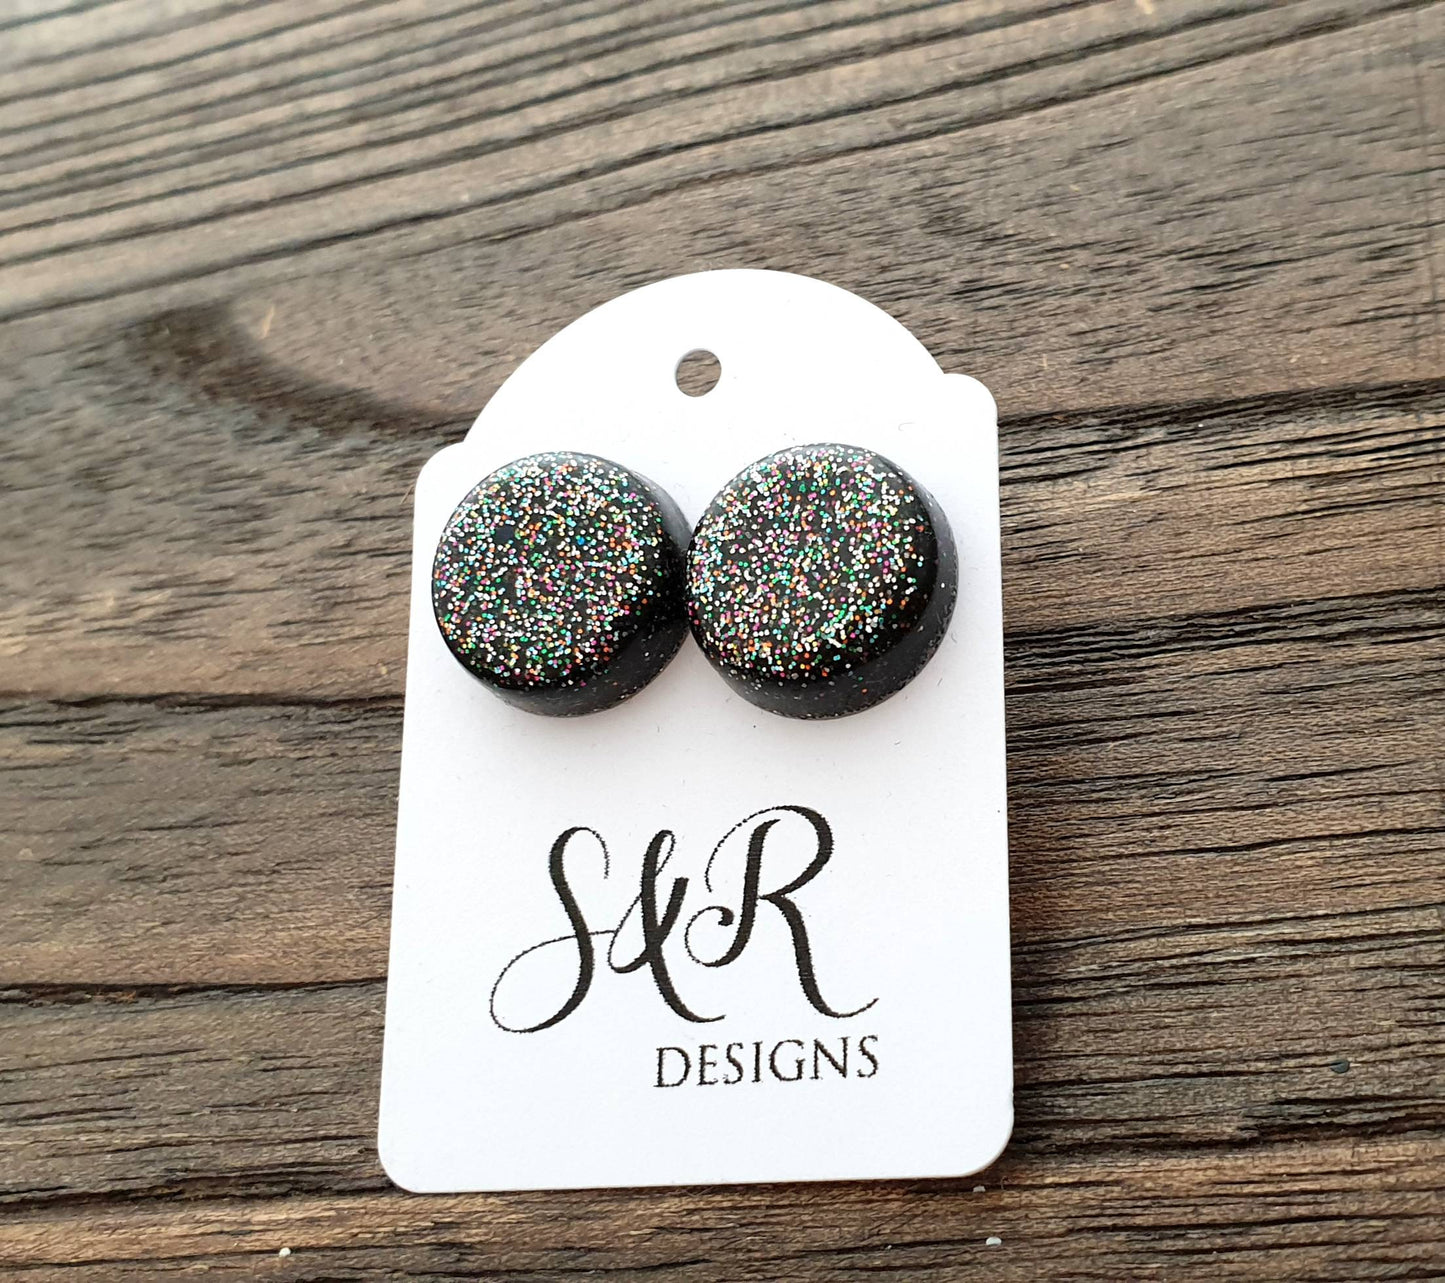 Hand Made Resin Black Rainbow Glitter Mix Stud Earrings made of Stainless Steel. 14mm